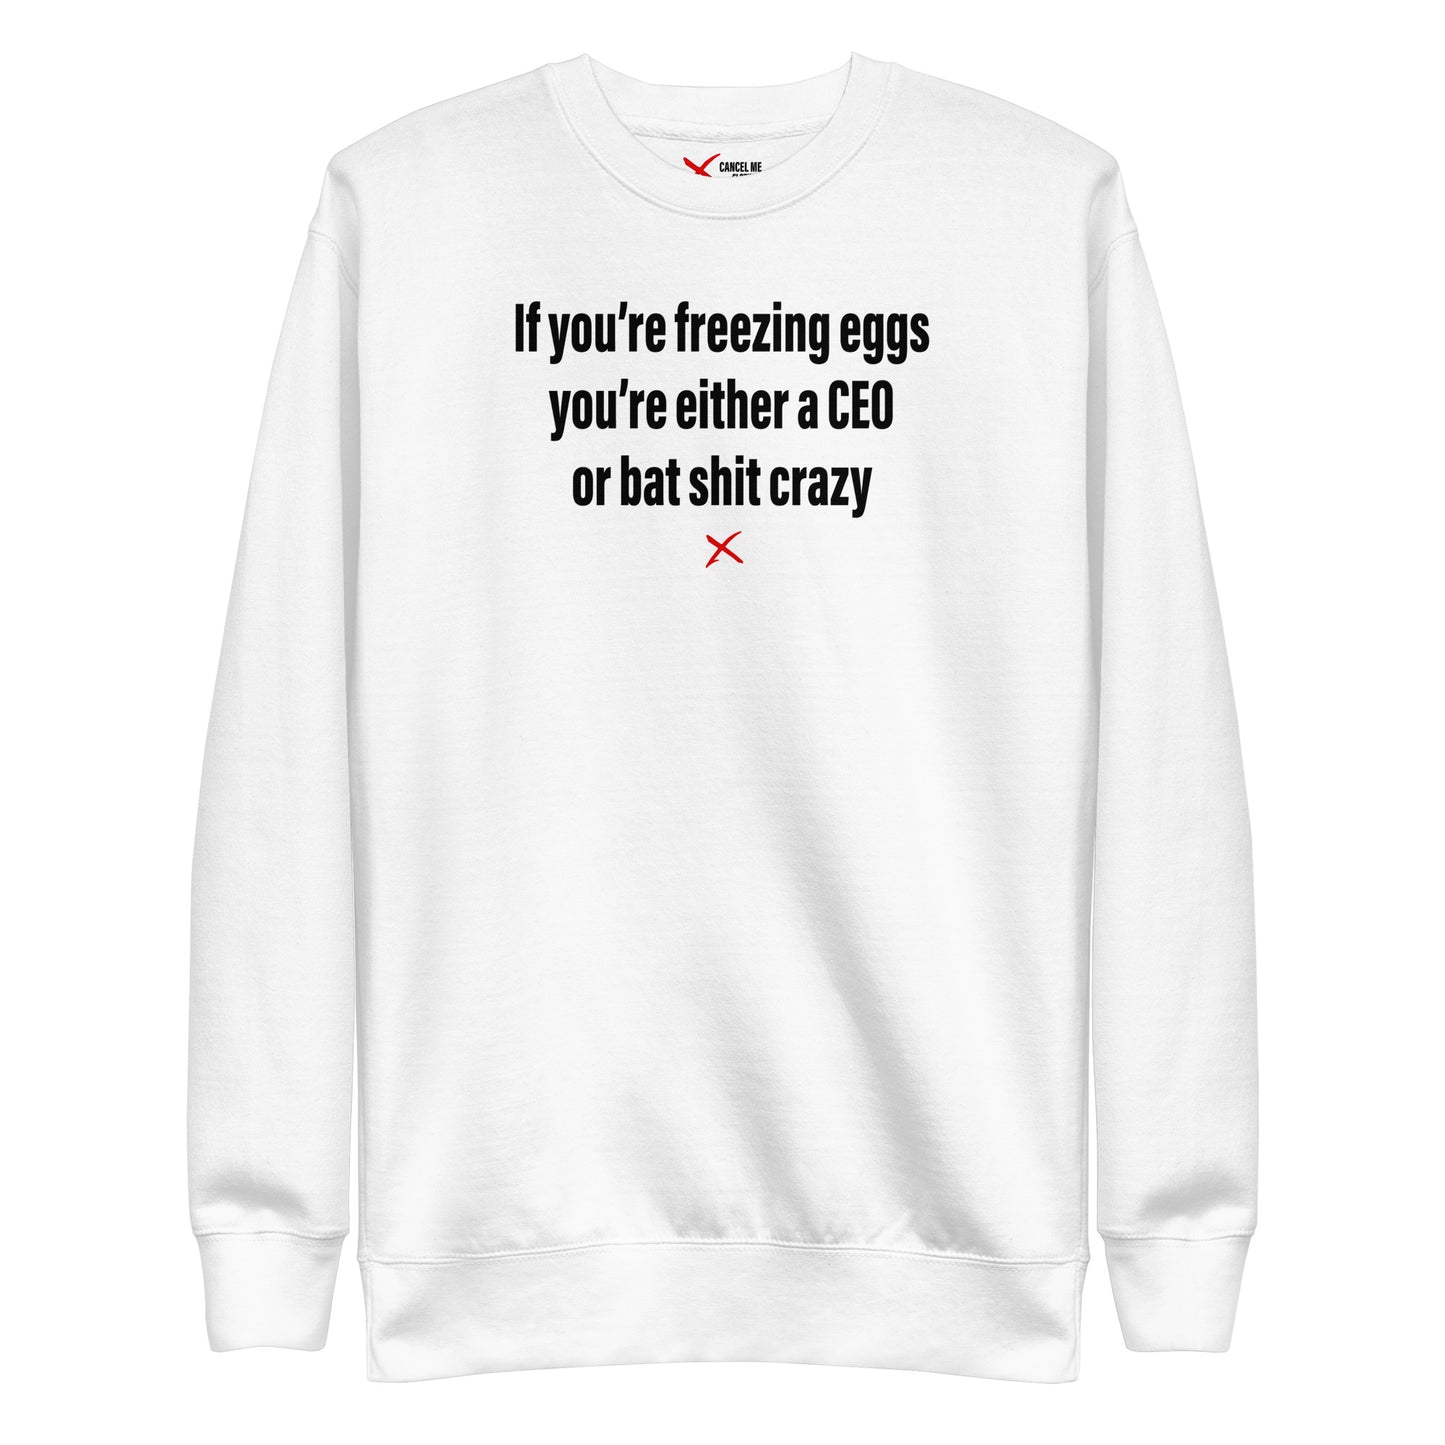 If you're freezing eggs you're either a CEO or bat shit crazy - Sweatshirt